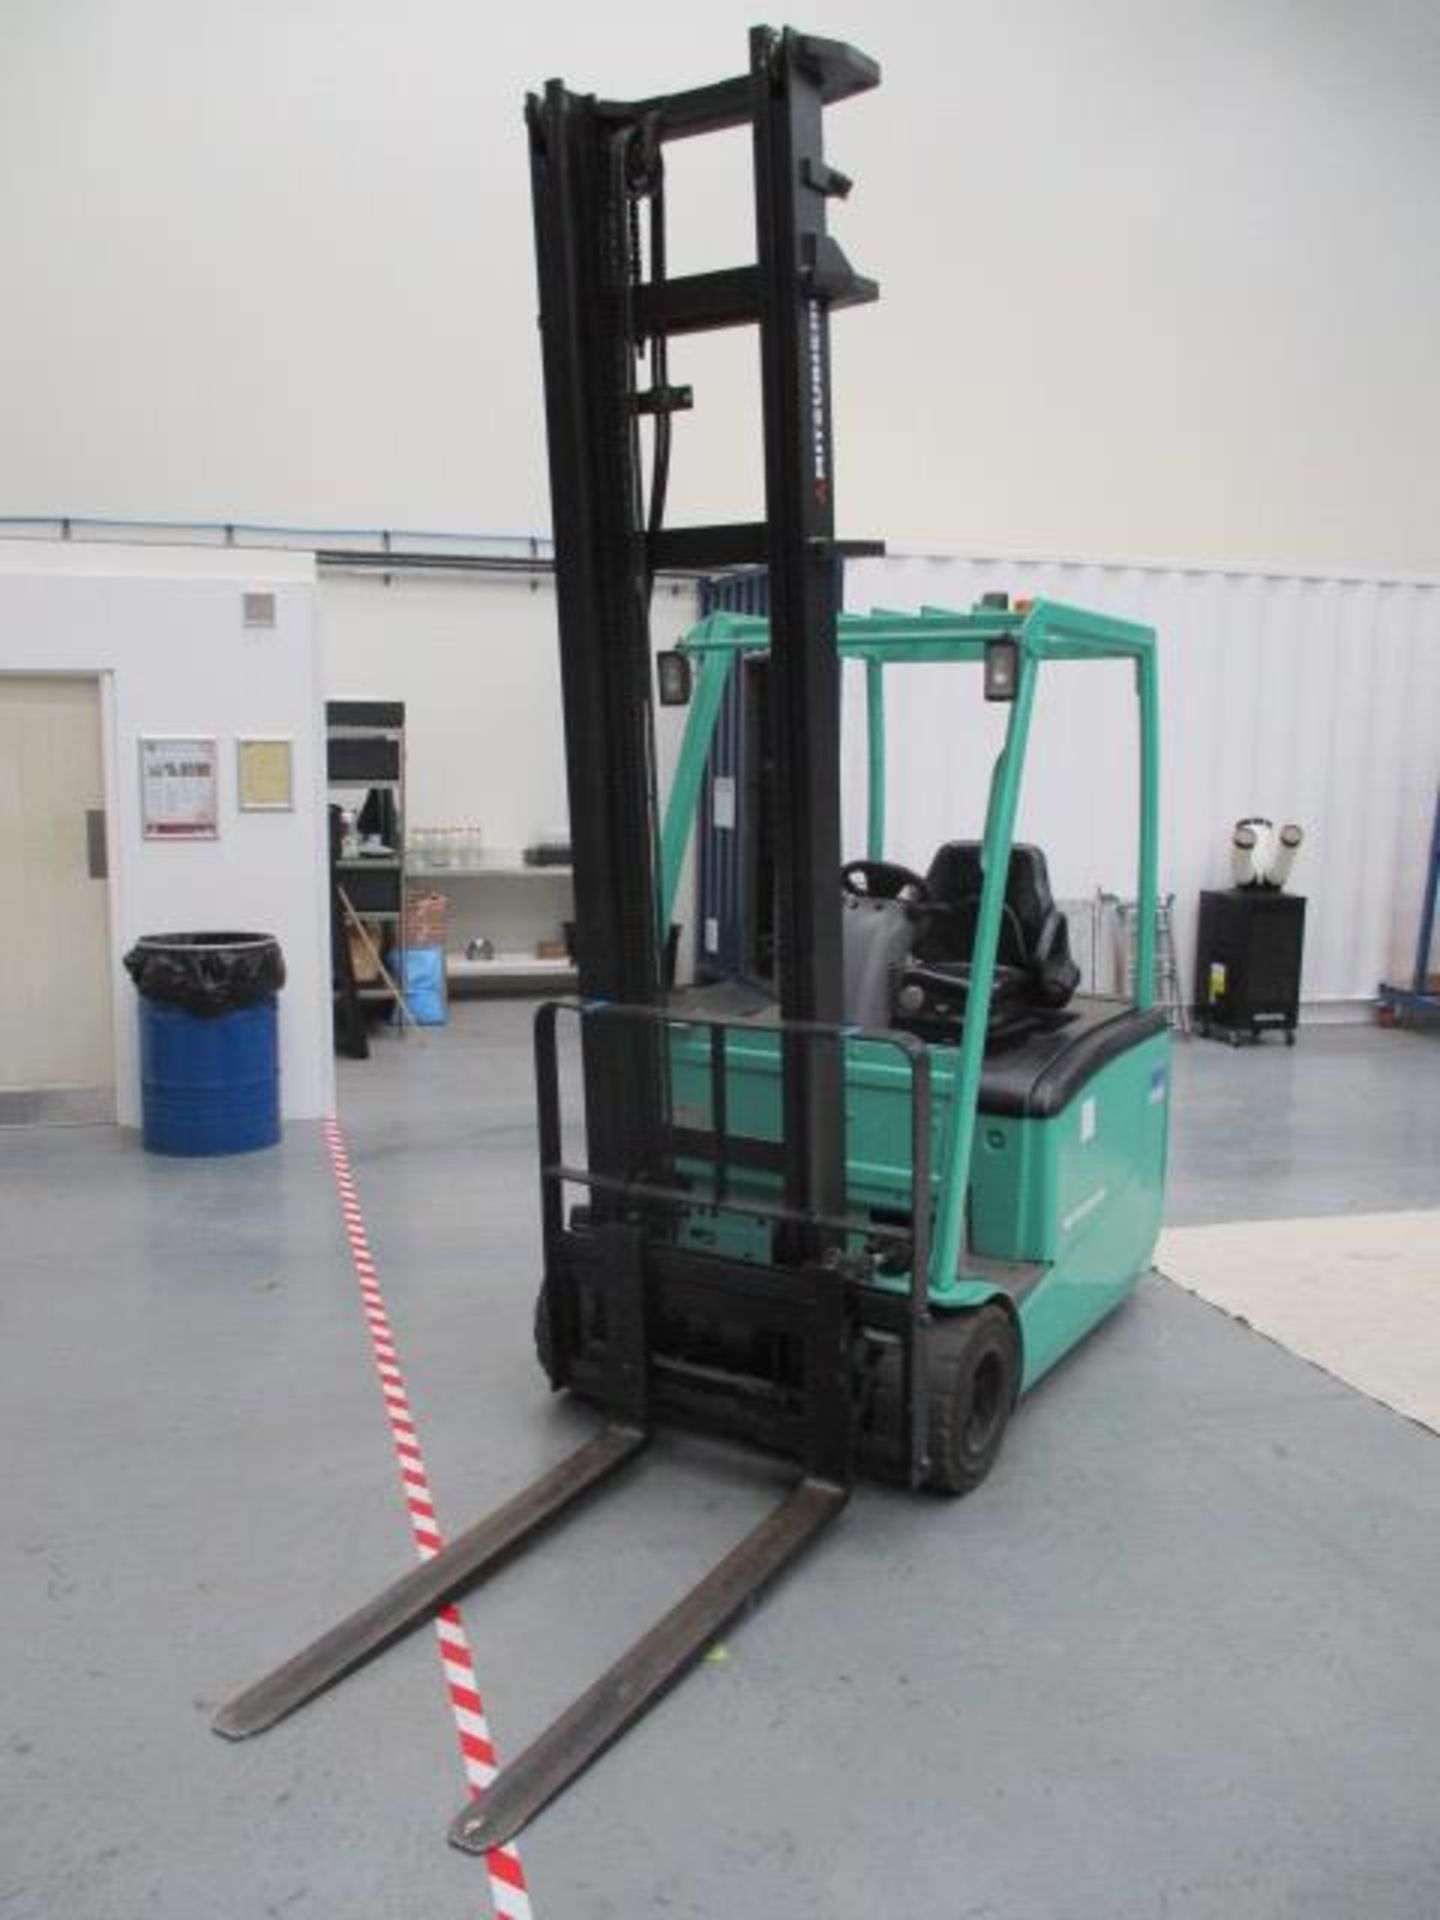 1, Mitsubishi FB20PNT 2 Ton Battery Powered Ride-On Forklift Truck Serial No. EFB2400018 (2012) with - Image 4 of 5